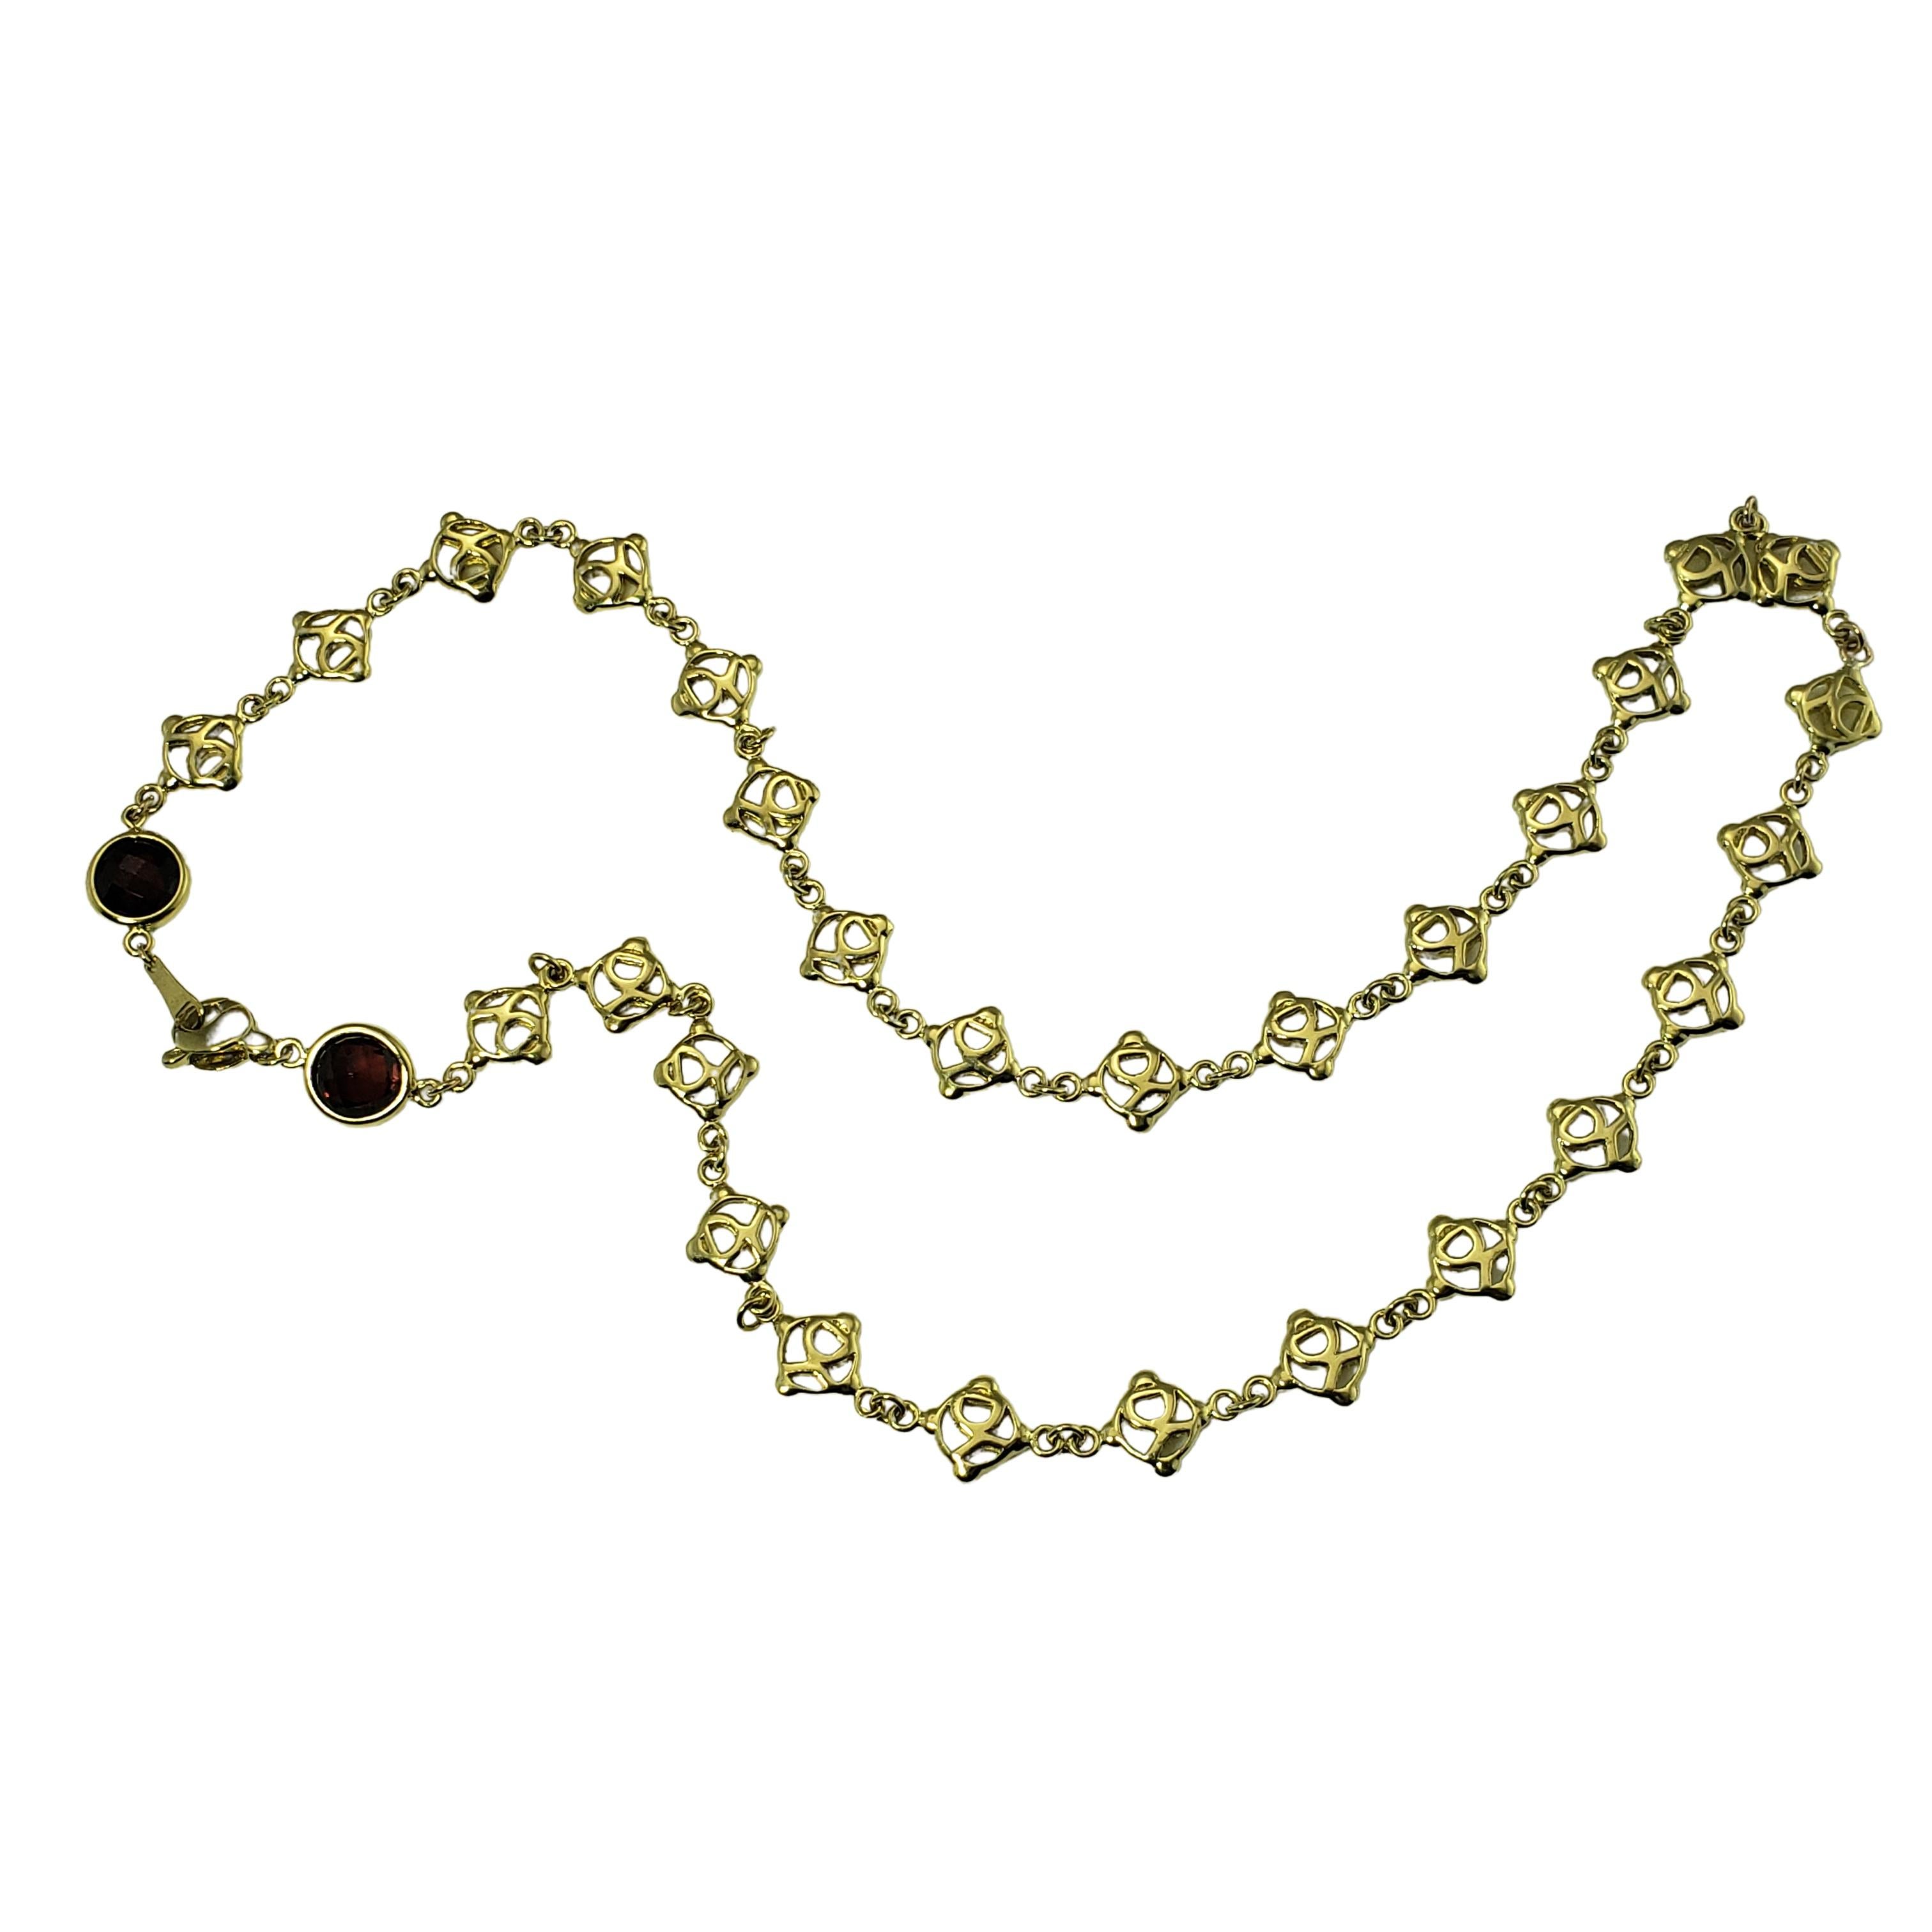 Vintage David Yurman 18 Karat Yellow Gold and Garnet Logo Link Necklace-

This stunning David Yurman necklace is crafted in 18K yellow gold featuring D.Y. logo links with two bezel set garnets (9 mm each). Width: 9 mm.

Size: 19.25